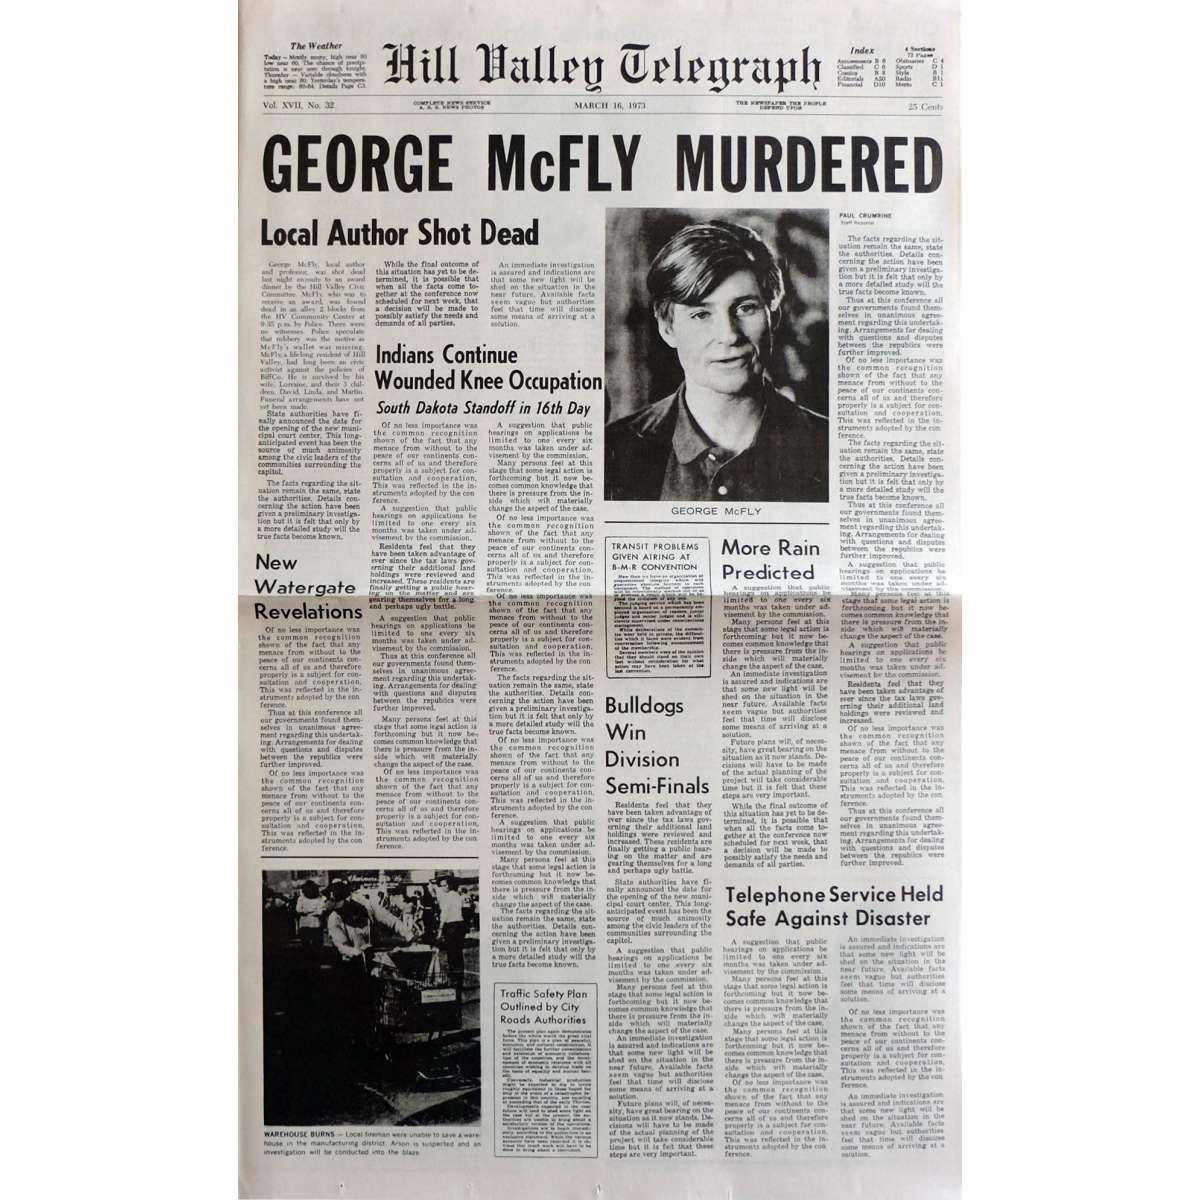 BACK TO THE FUTURE Newspapers Prop Replicas George McFly